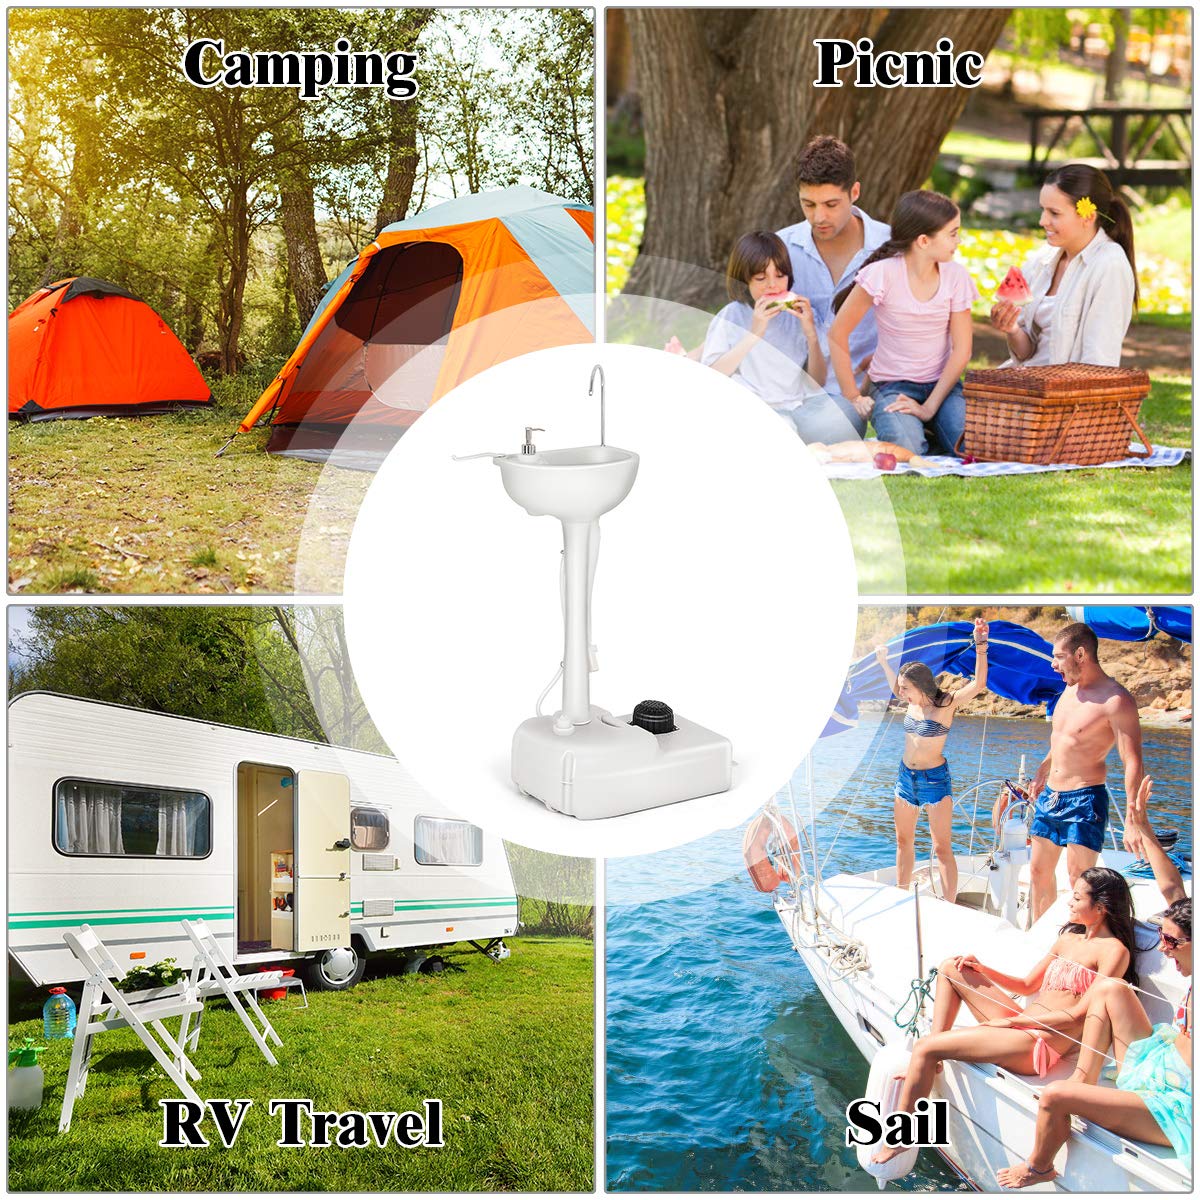 Portable Camping Sink with Soap Dispenser and Towel Holder